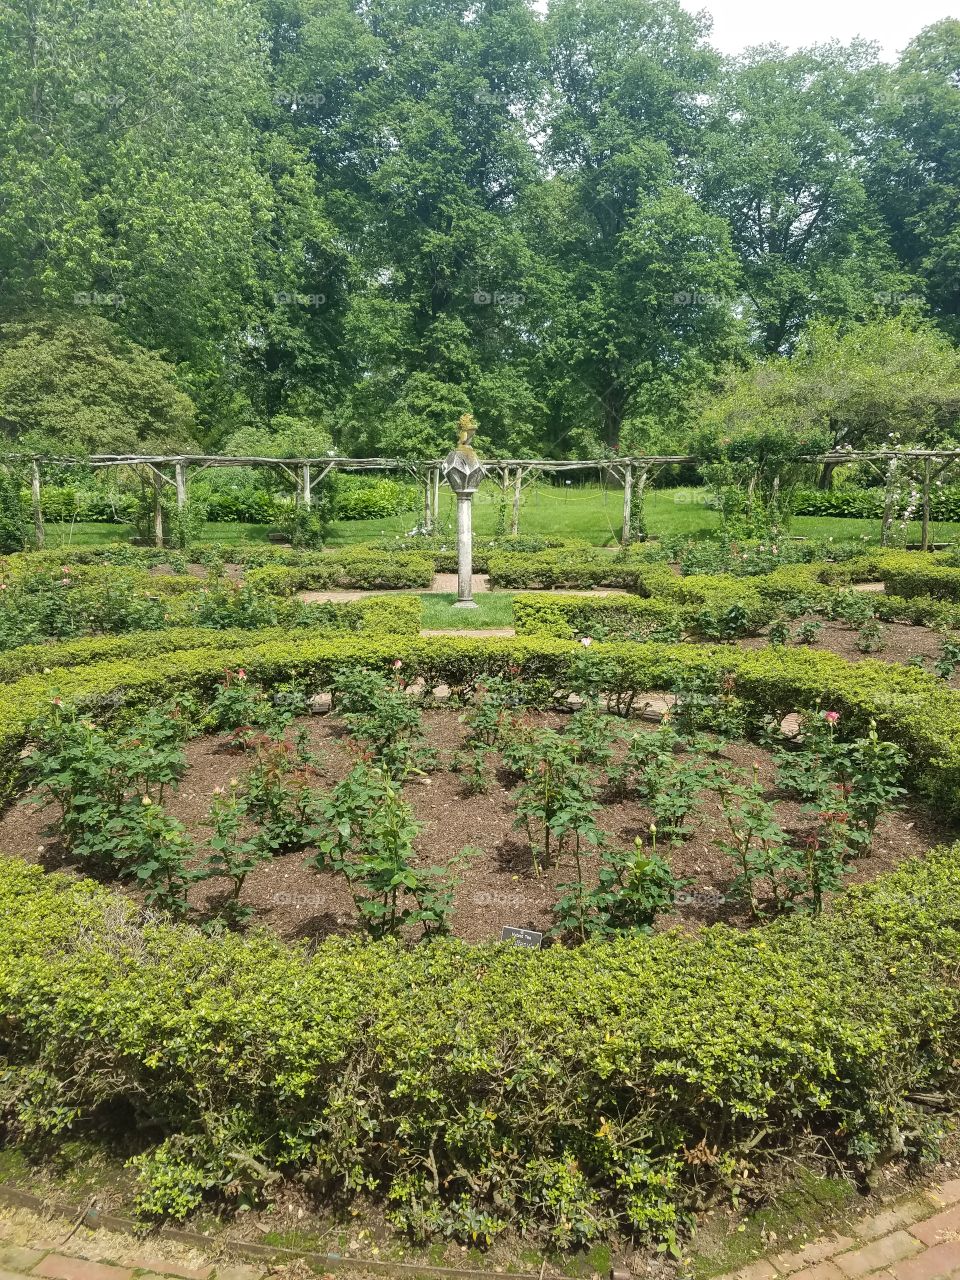 Beginning of Summer at Old Westbury Gardens on Long Island. Mix of Clouds and Sun. No Filter. Walking Path  Captured on Android Phone - Galaxy S7. May 2017.